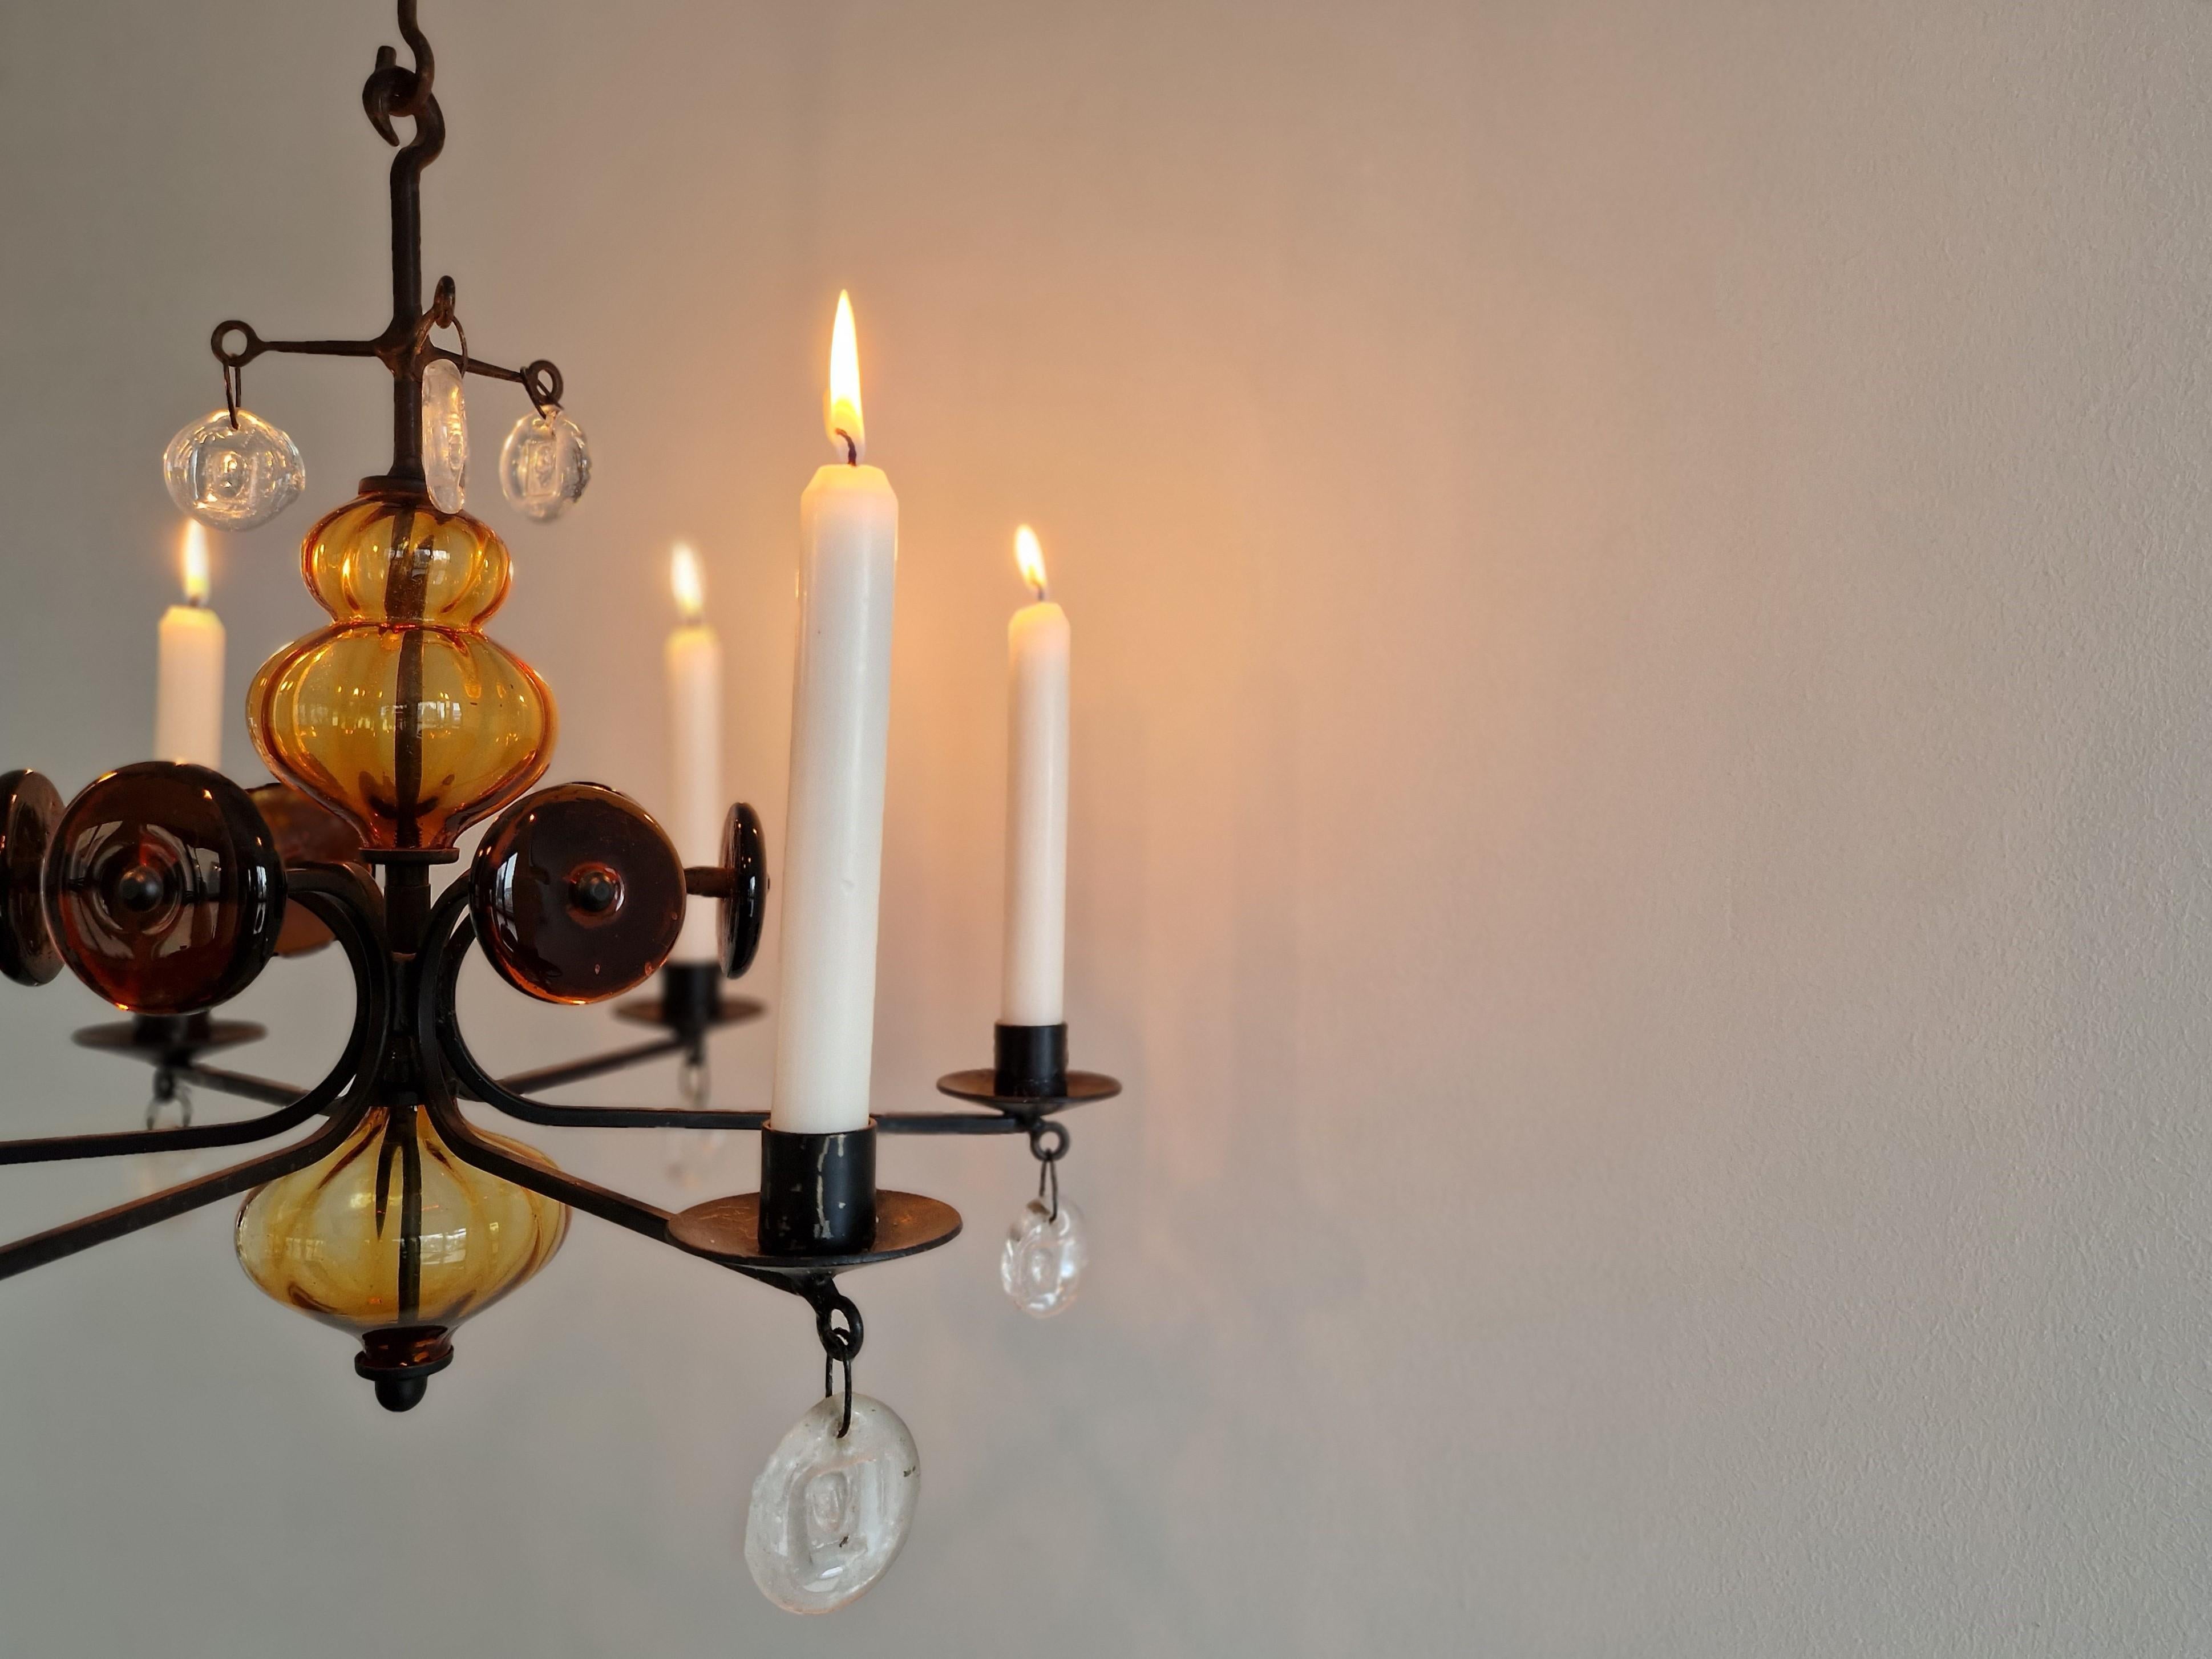 Mid-20th Century Amber glass and wrought iron chandelier by Erik Höglund for Boda, Sweden